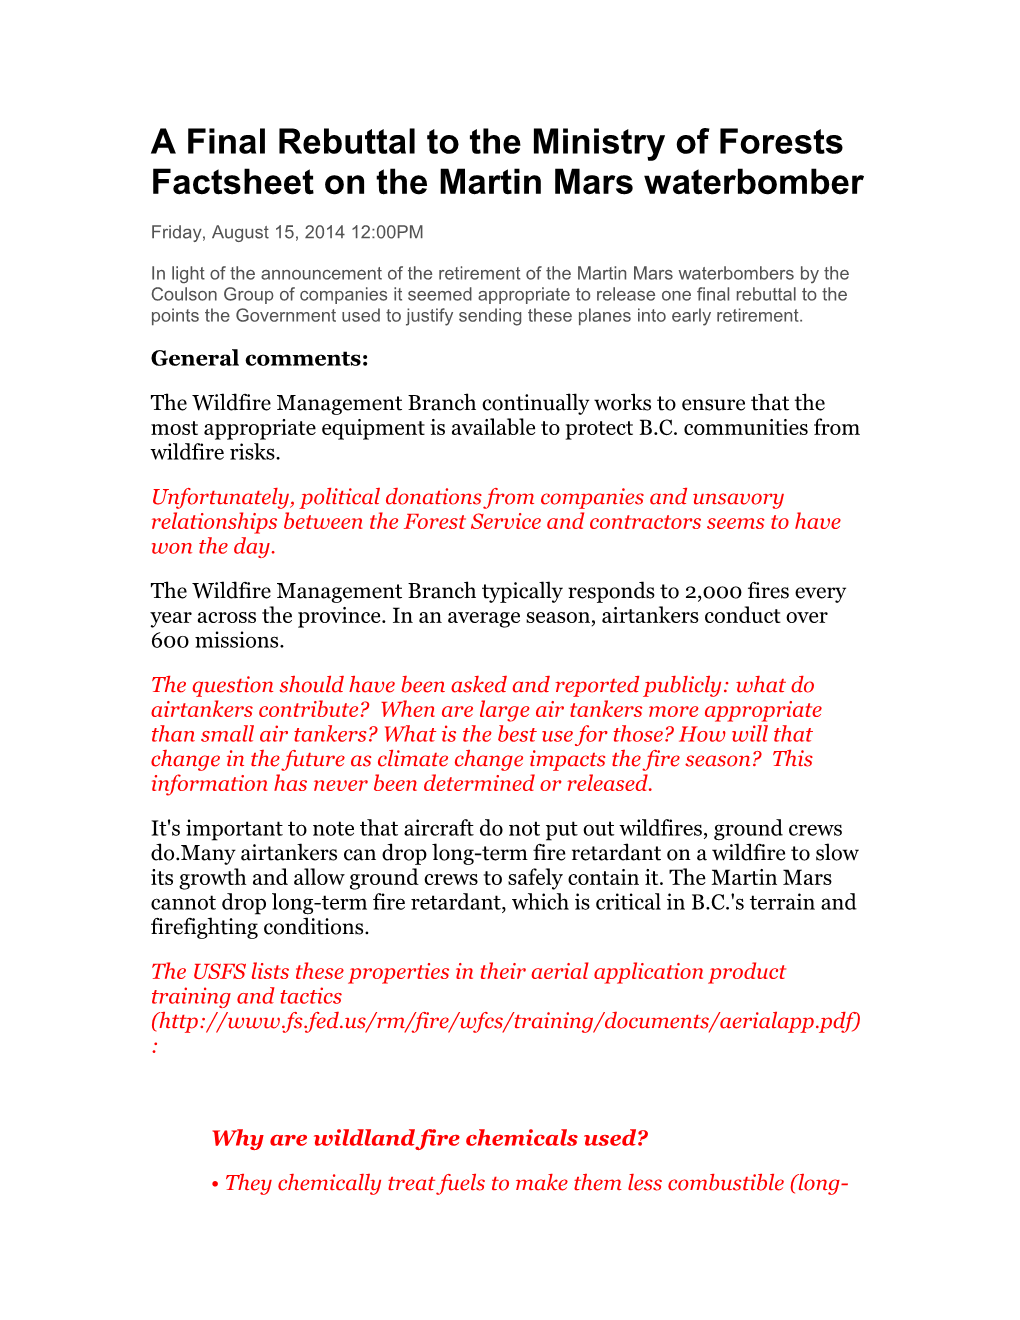 A Final Rebuttal to the Ministry of Forests Factsheet on the Martin Mars Waterbomber